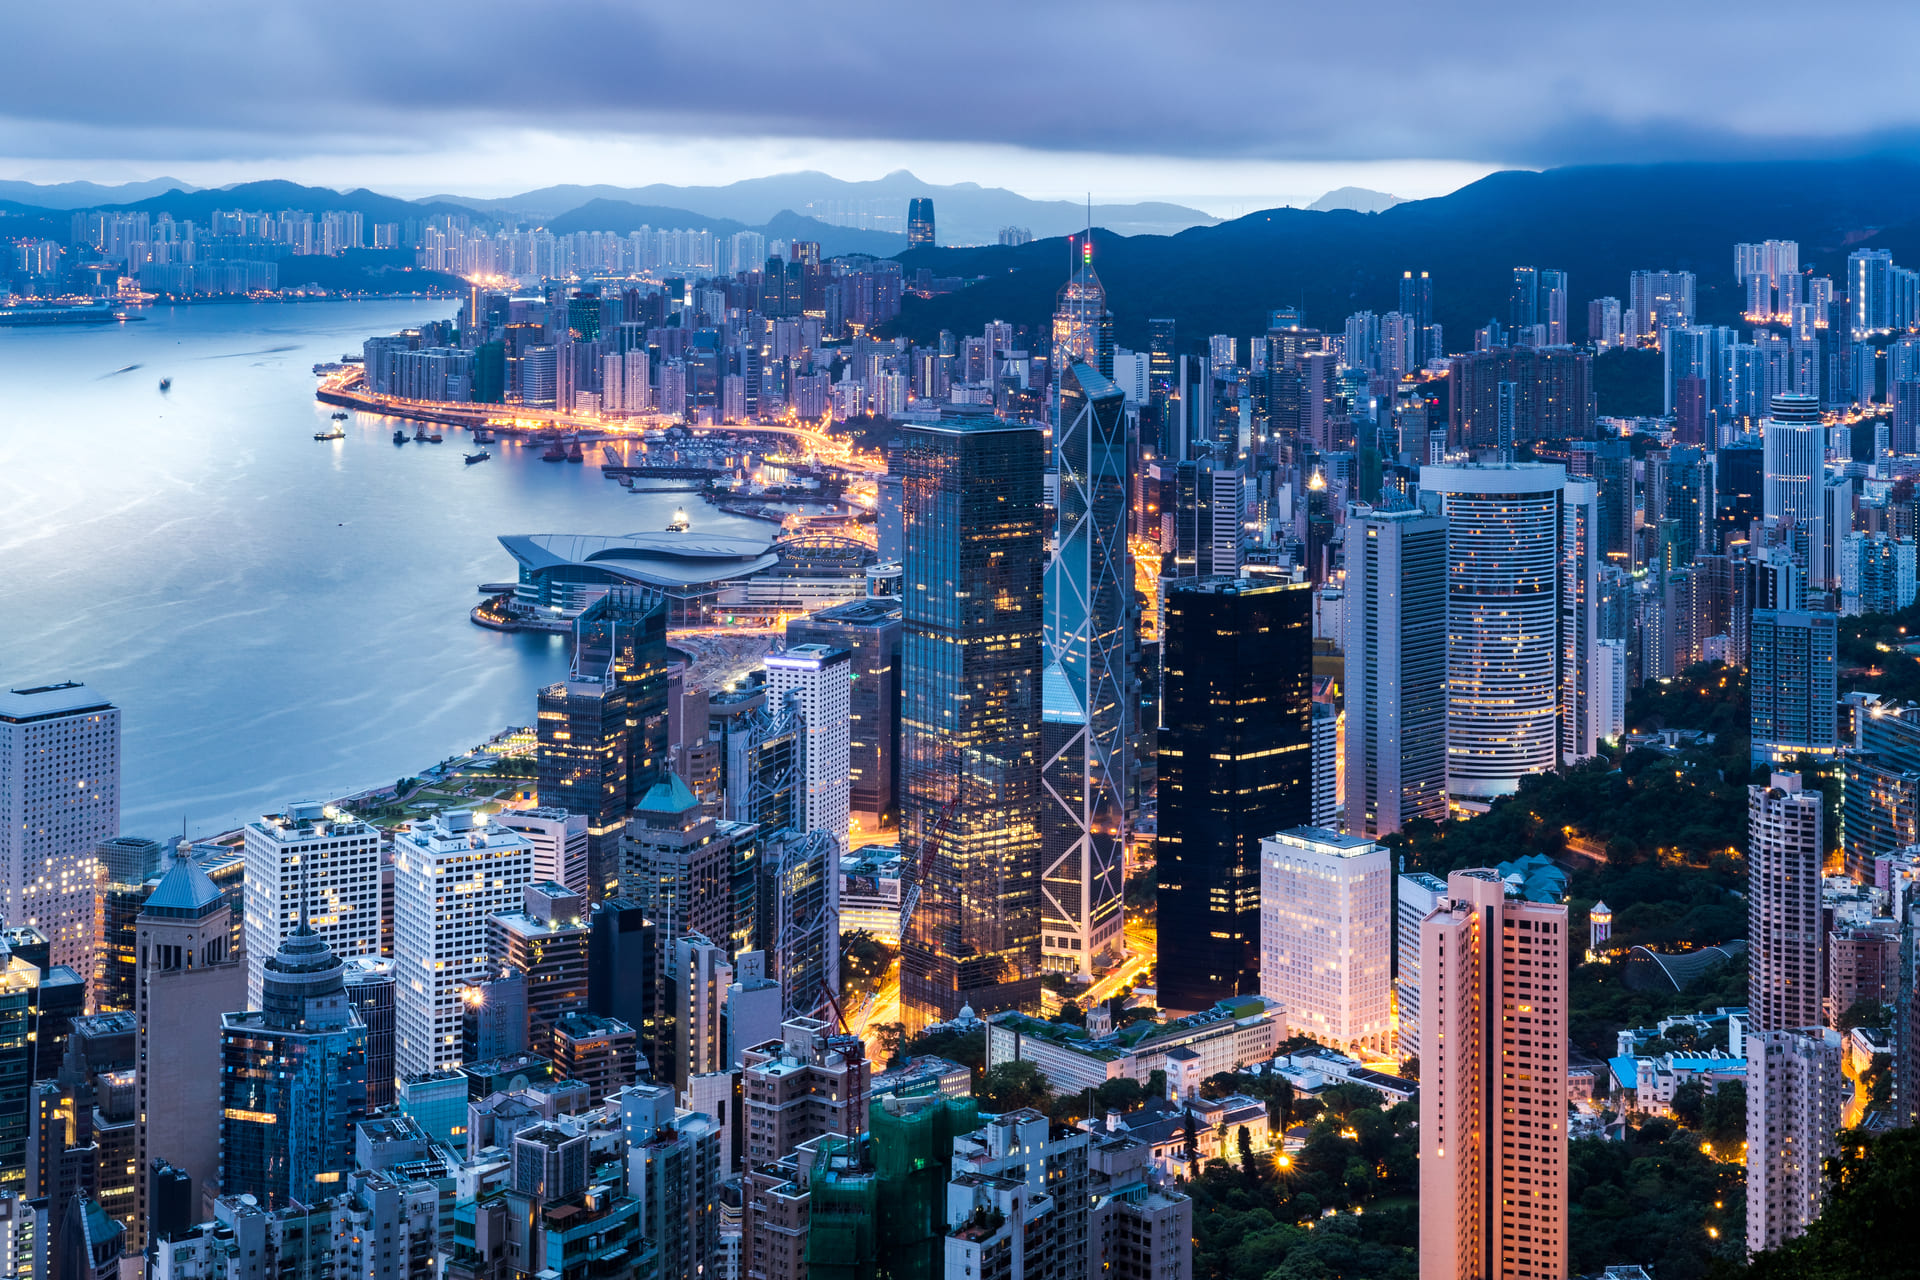 Hong Kong Skyscrapers: the 10 most famous - We Build Value